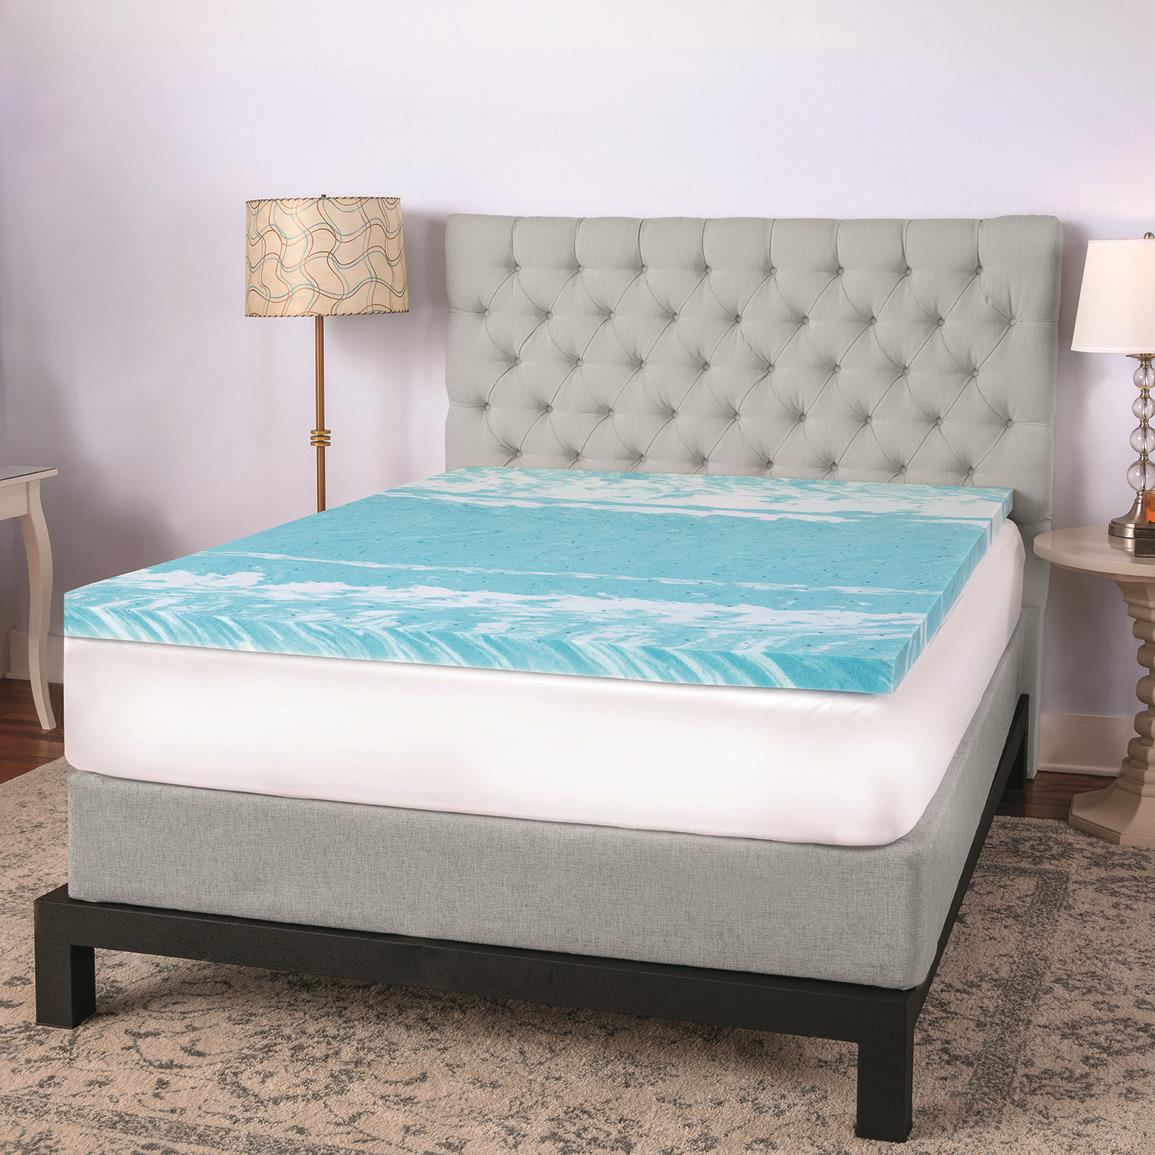 2" Memory Foam distributes your body weight